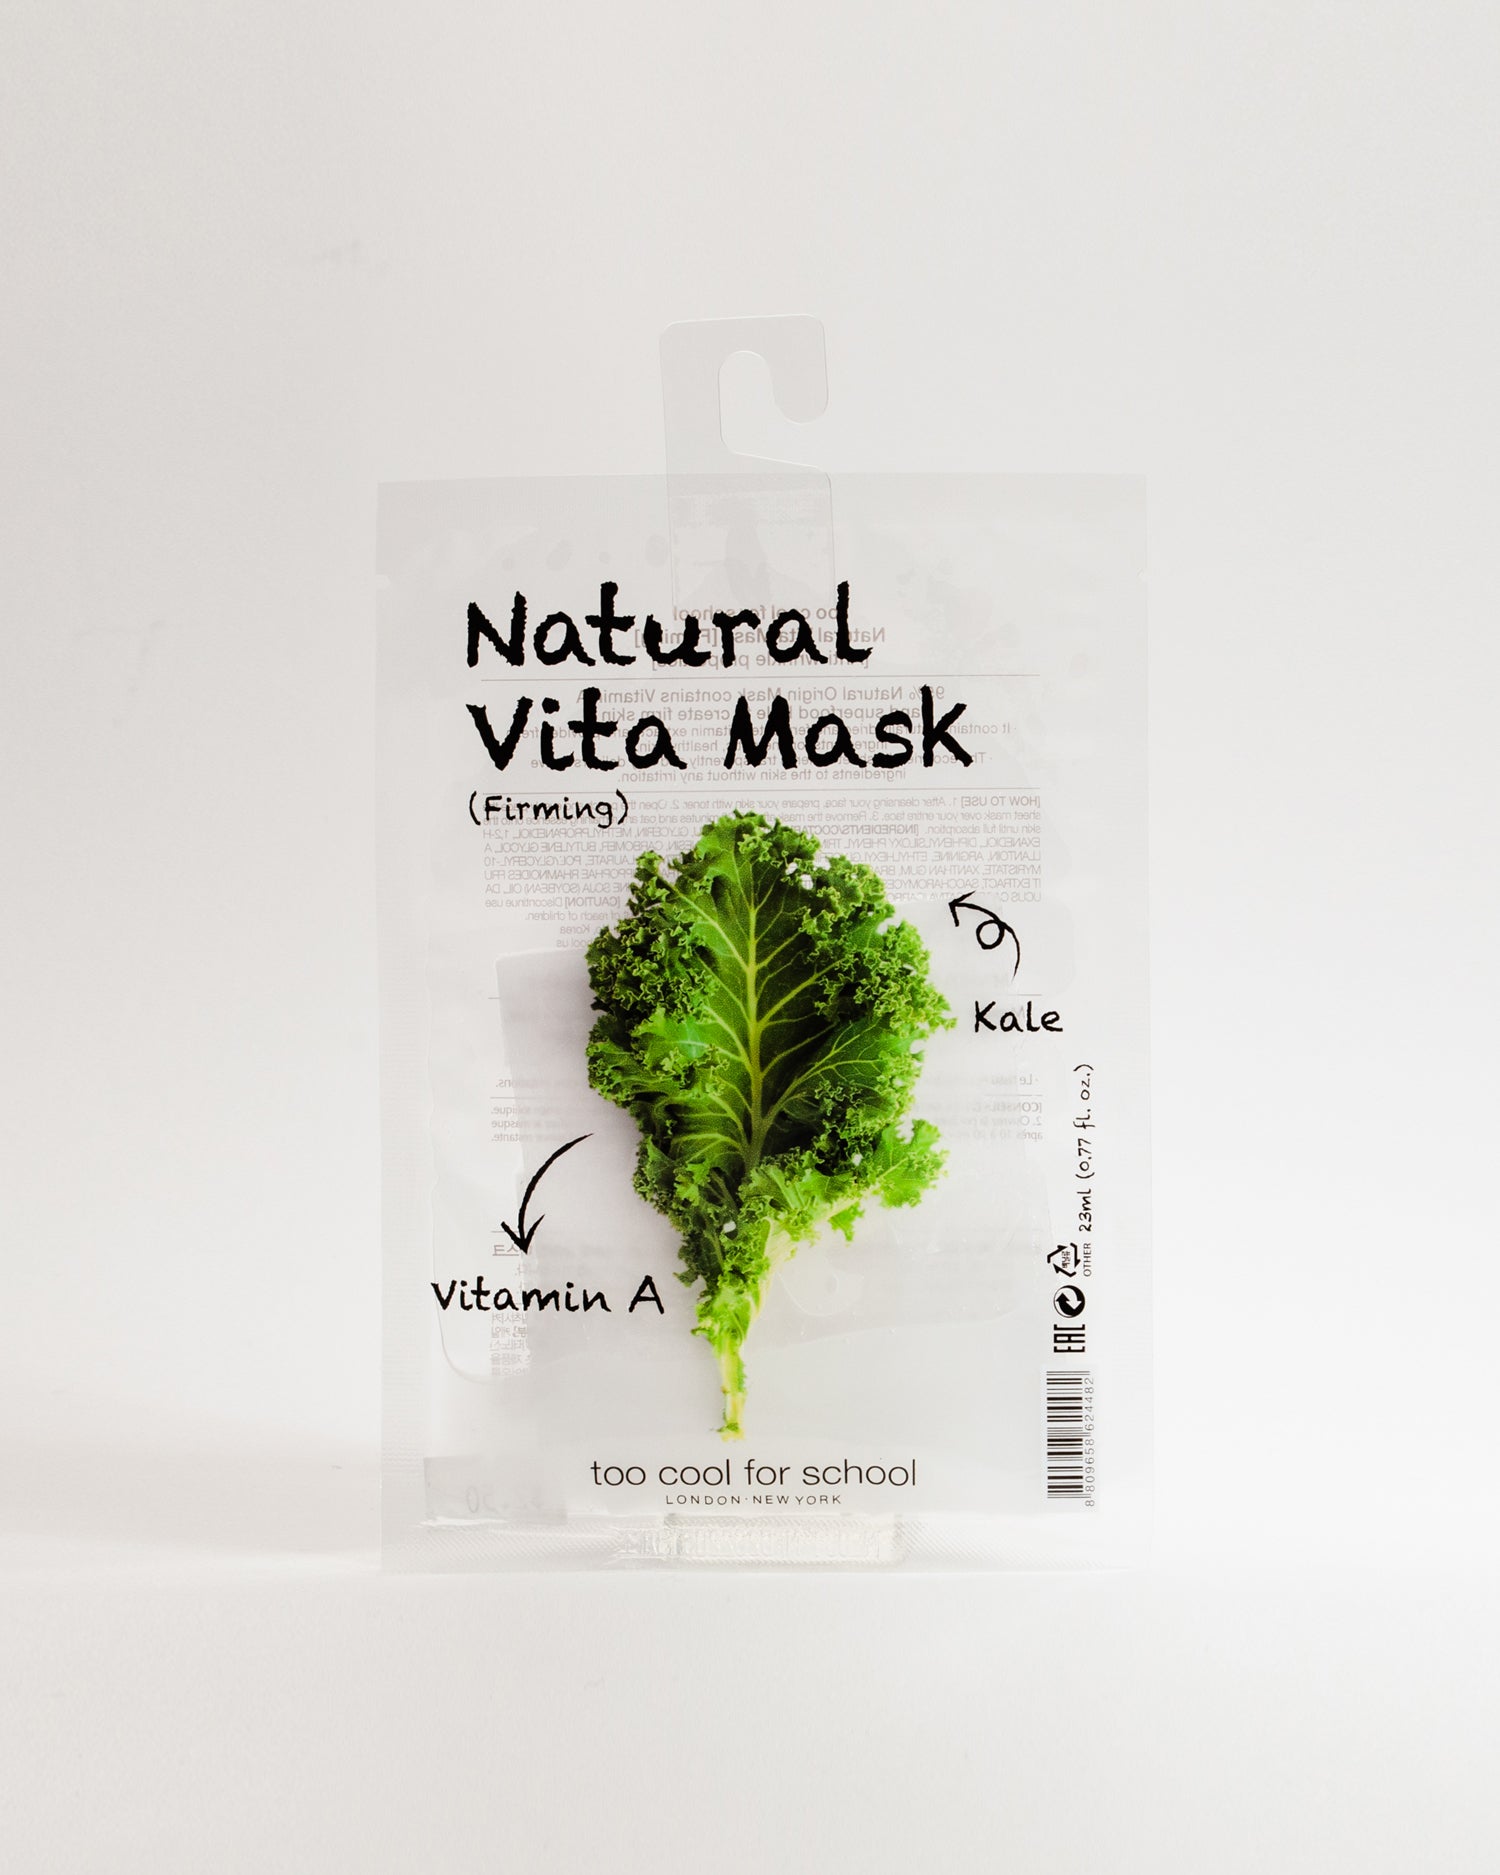 Too Cool For School Natural Vita Mask Firming (Kale) Sheet